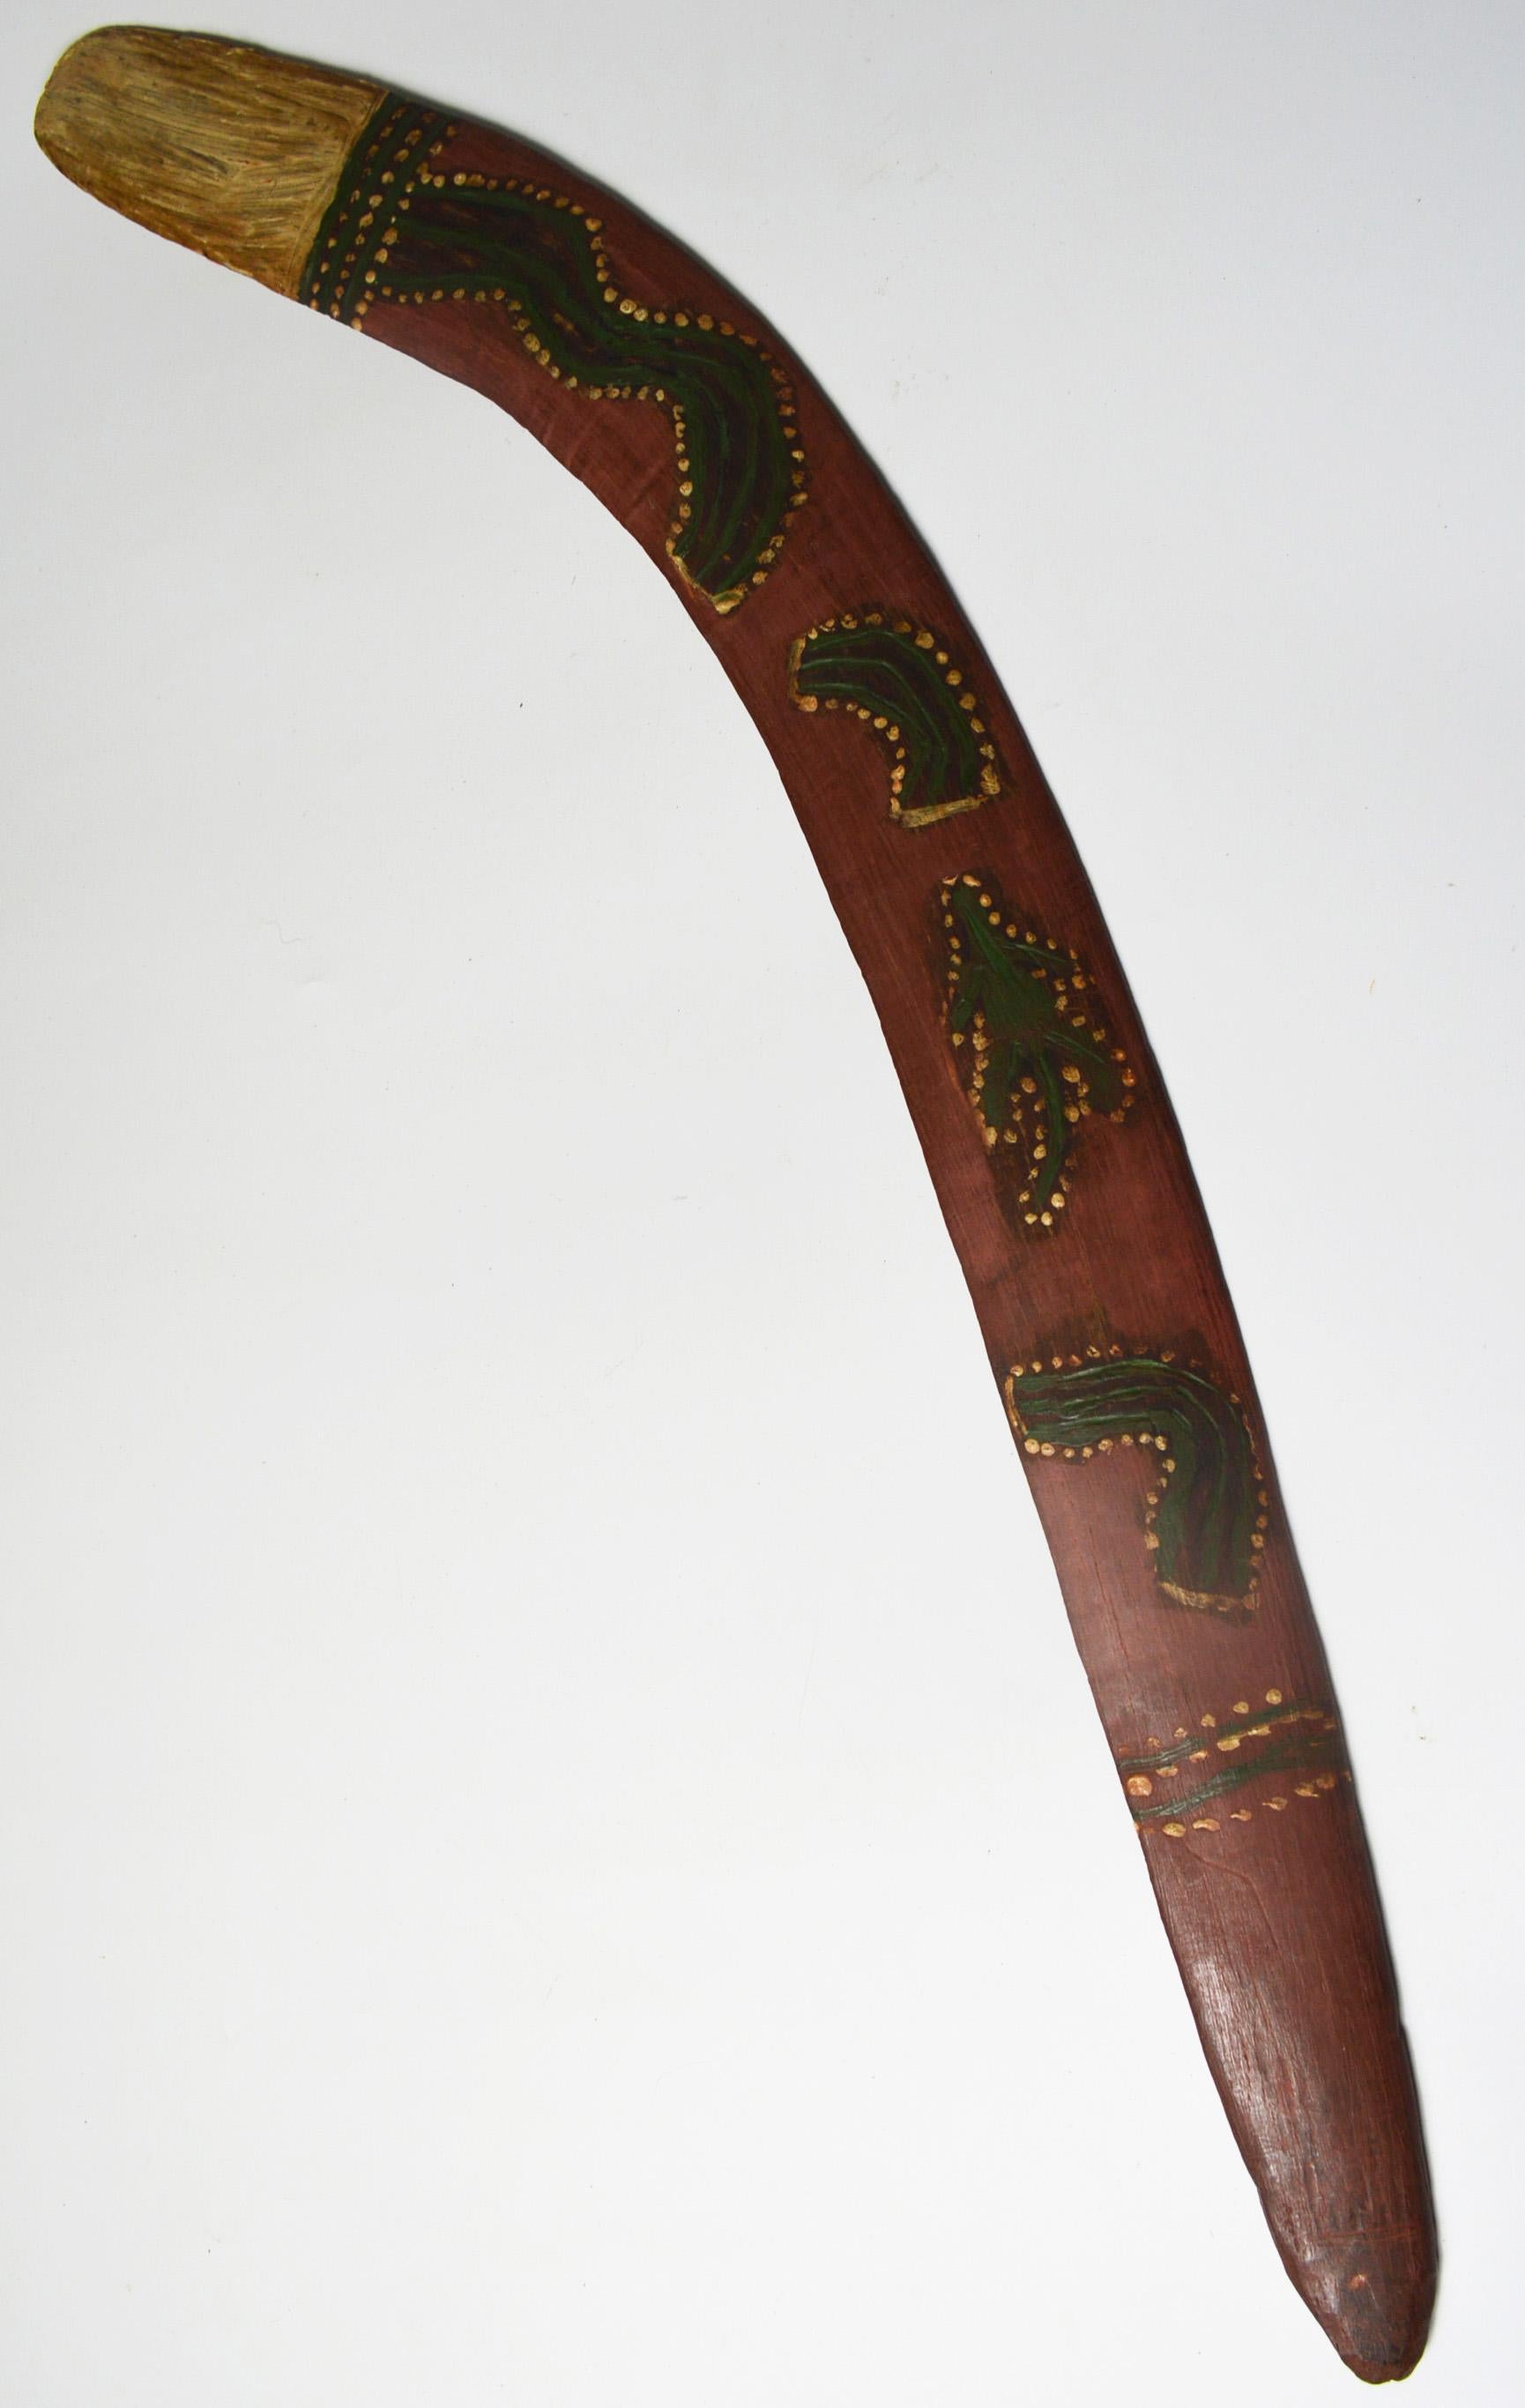 A Fine Australian Aboriginal painted ceremonial Boomerang
Decorated with paint and natural pigments
Central desert region Australia
Period: early 20th century
Provenance: Old UK Collection
Measures: Length: 76 cm, width 6 cm.